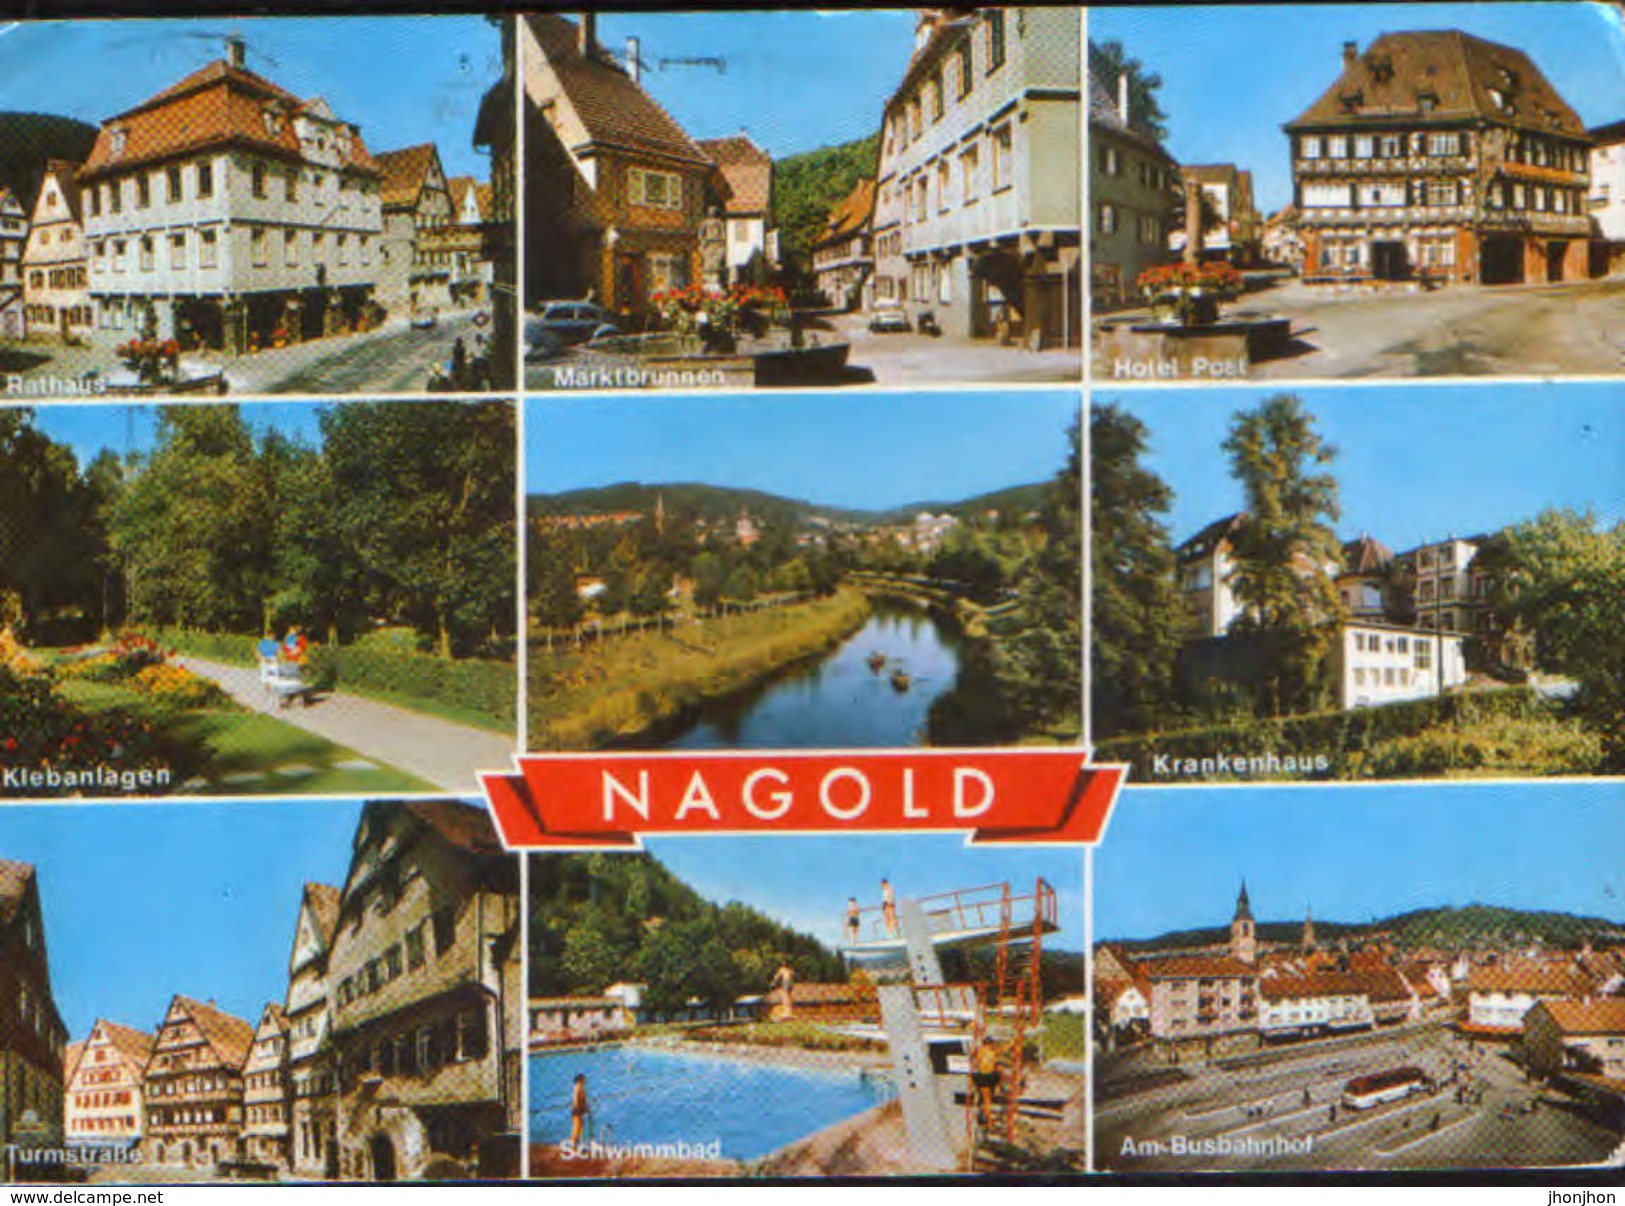 Deutschland - Postcard Circulated In 1980 Used - Nagold - Multipleviews - Nagold